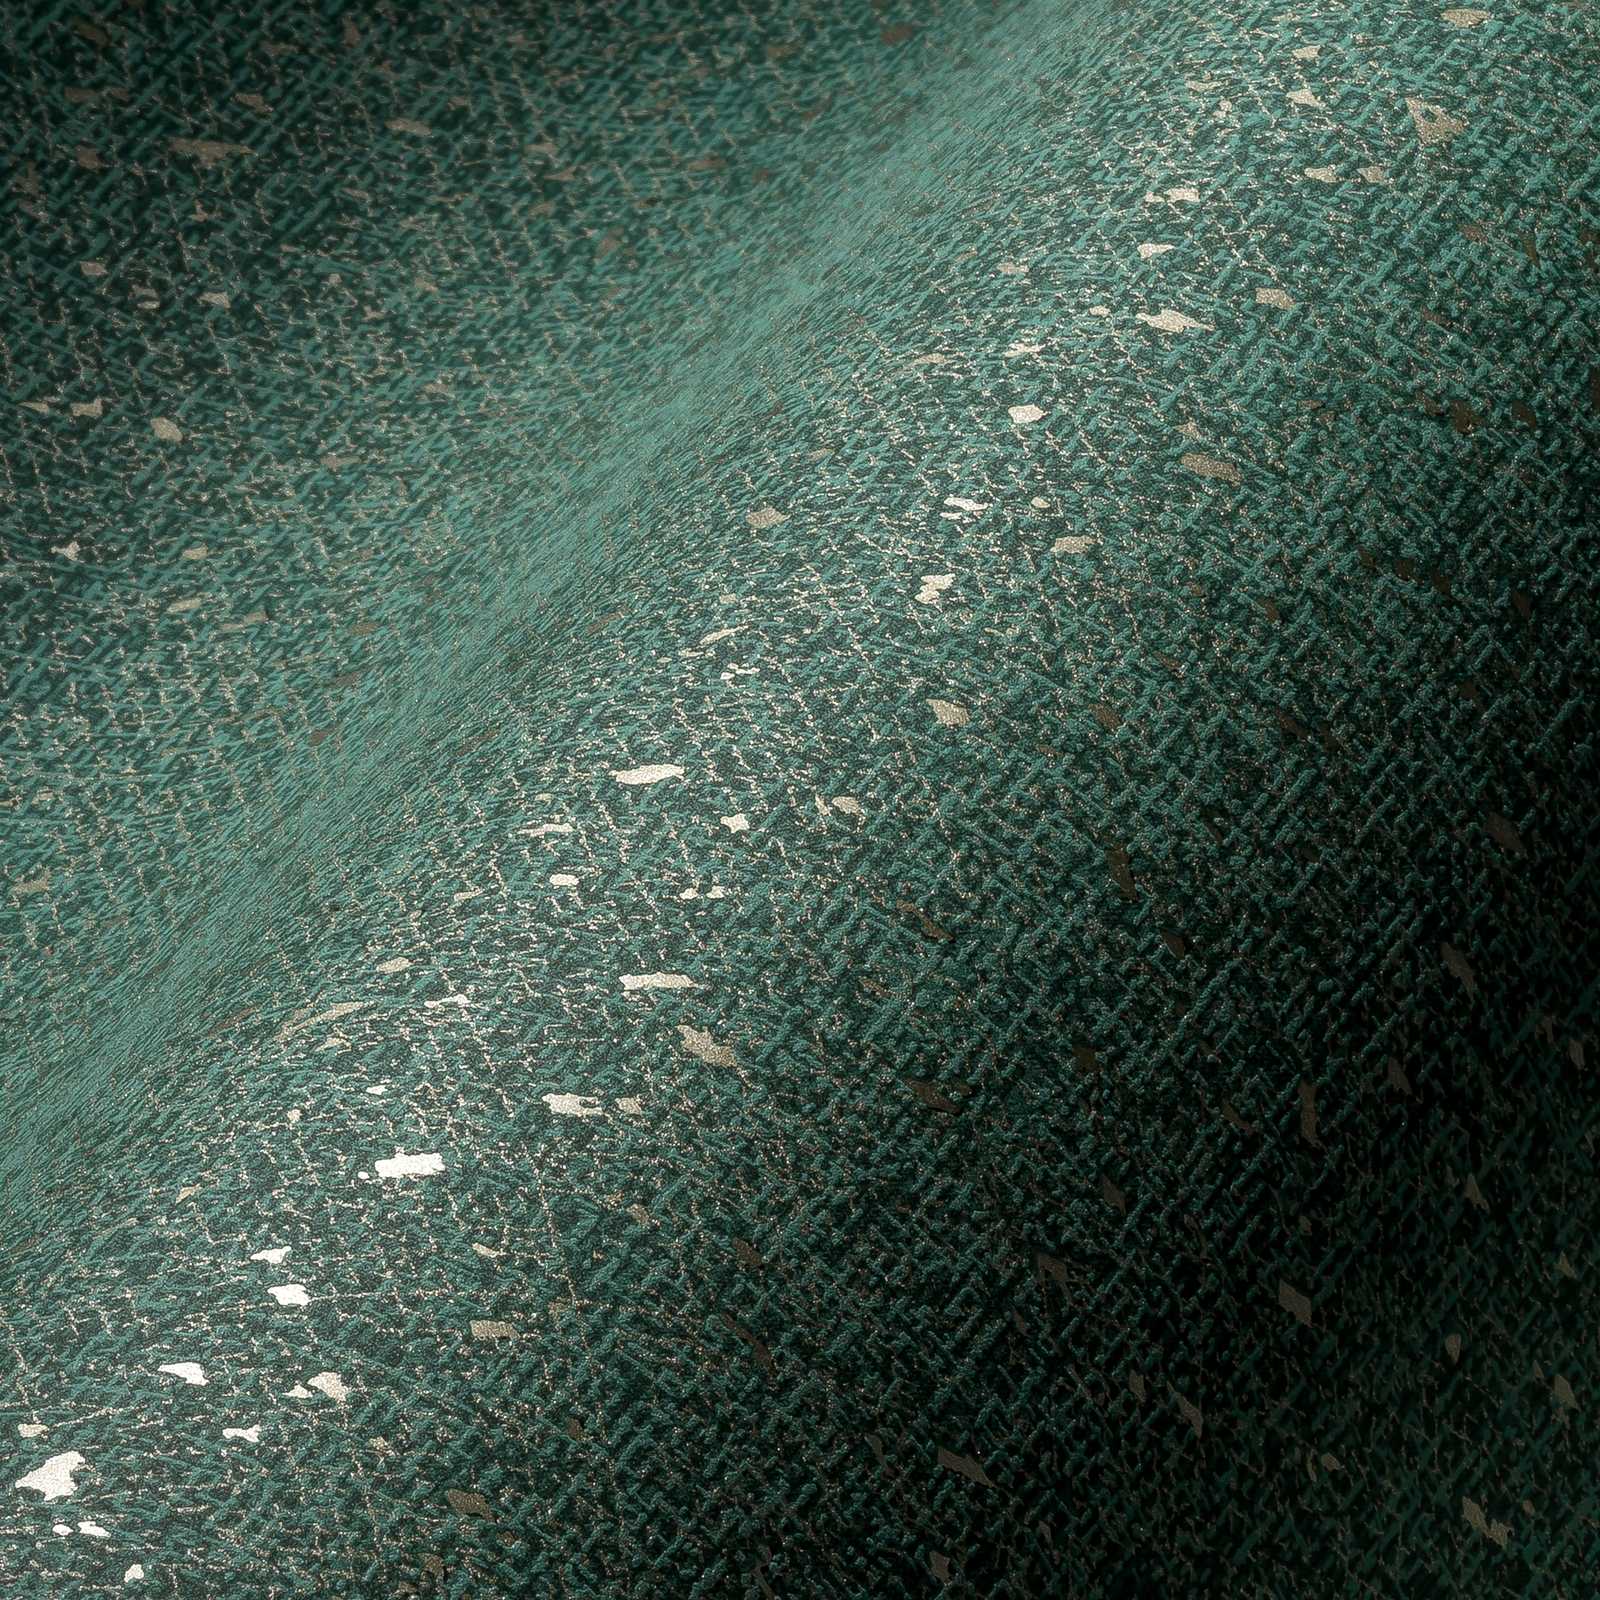             Wallpaper with textile structure and metallic accent - green, metallic
        